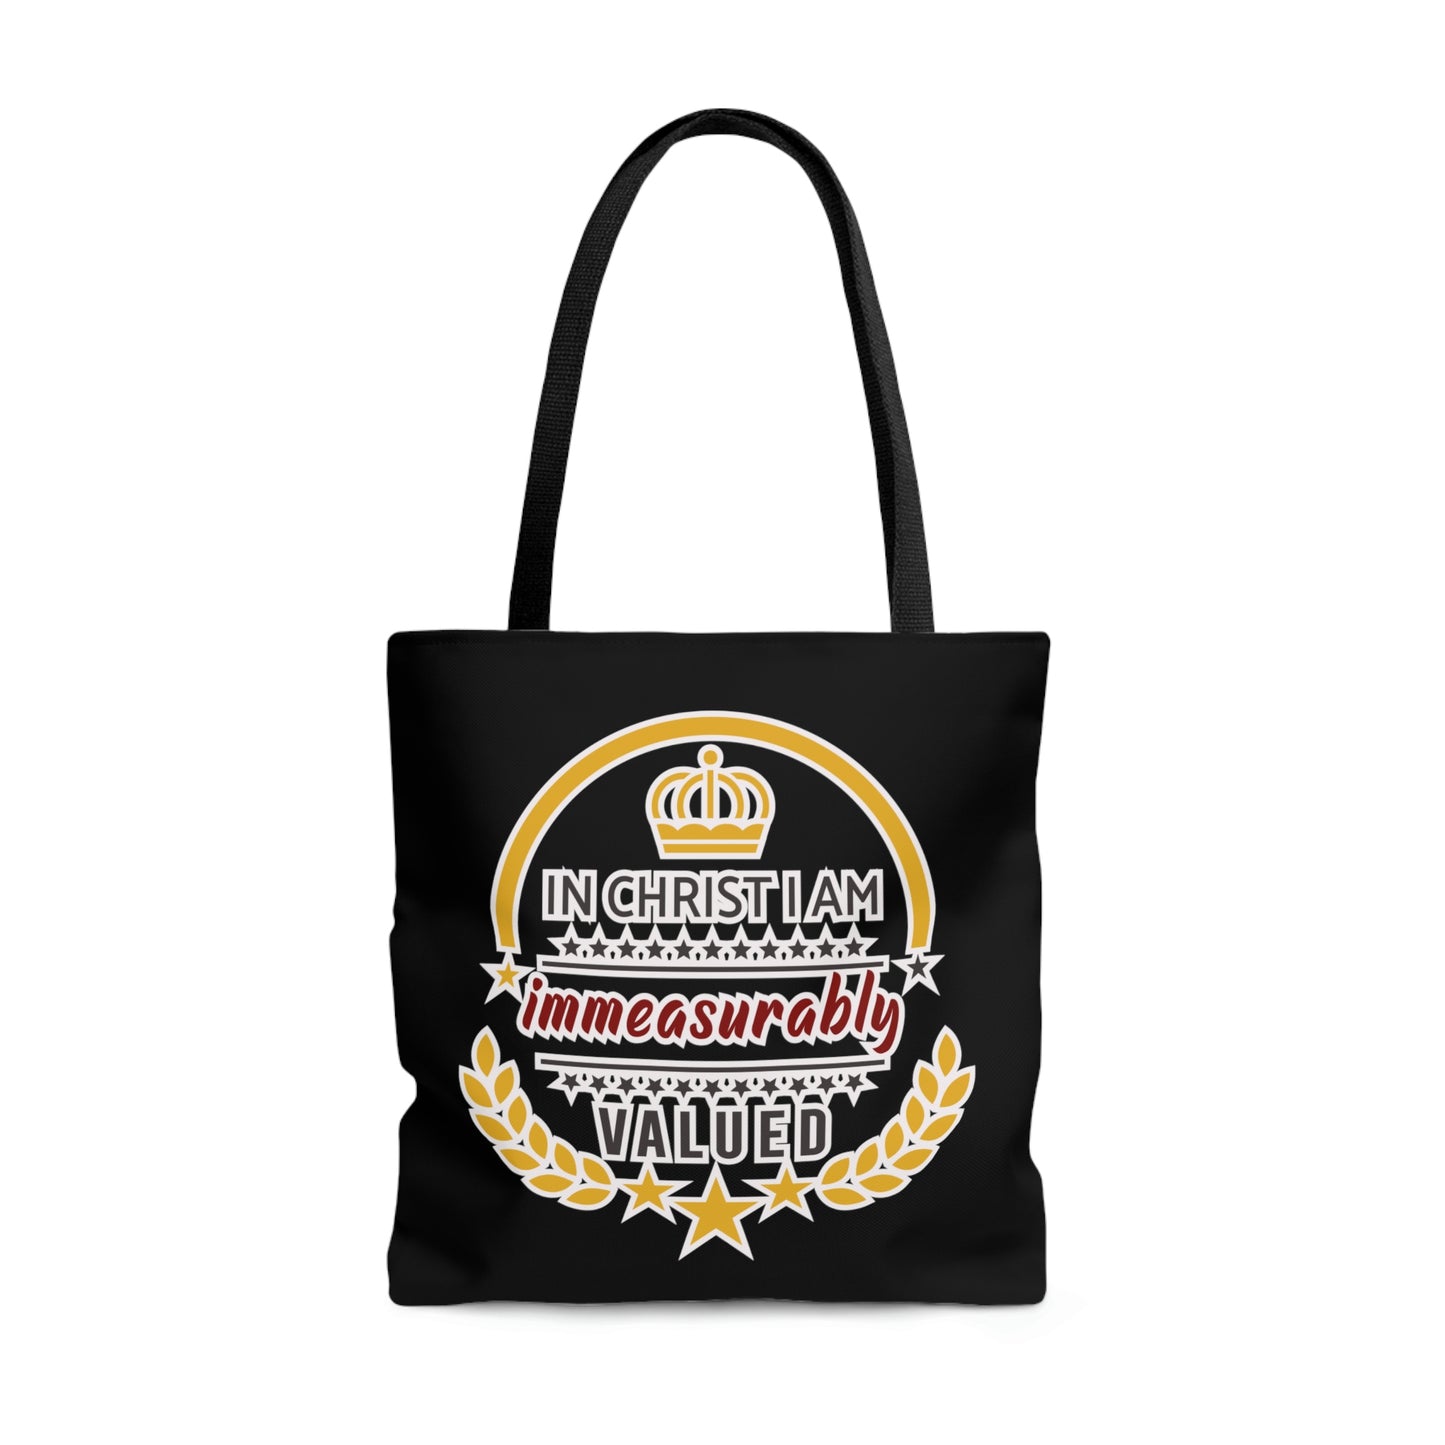 In Christ I Am Immeasurably Valued Tote Bag